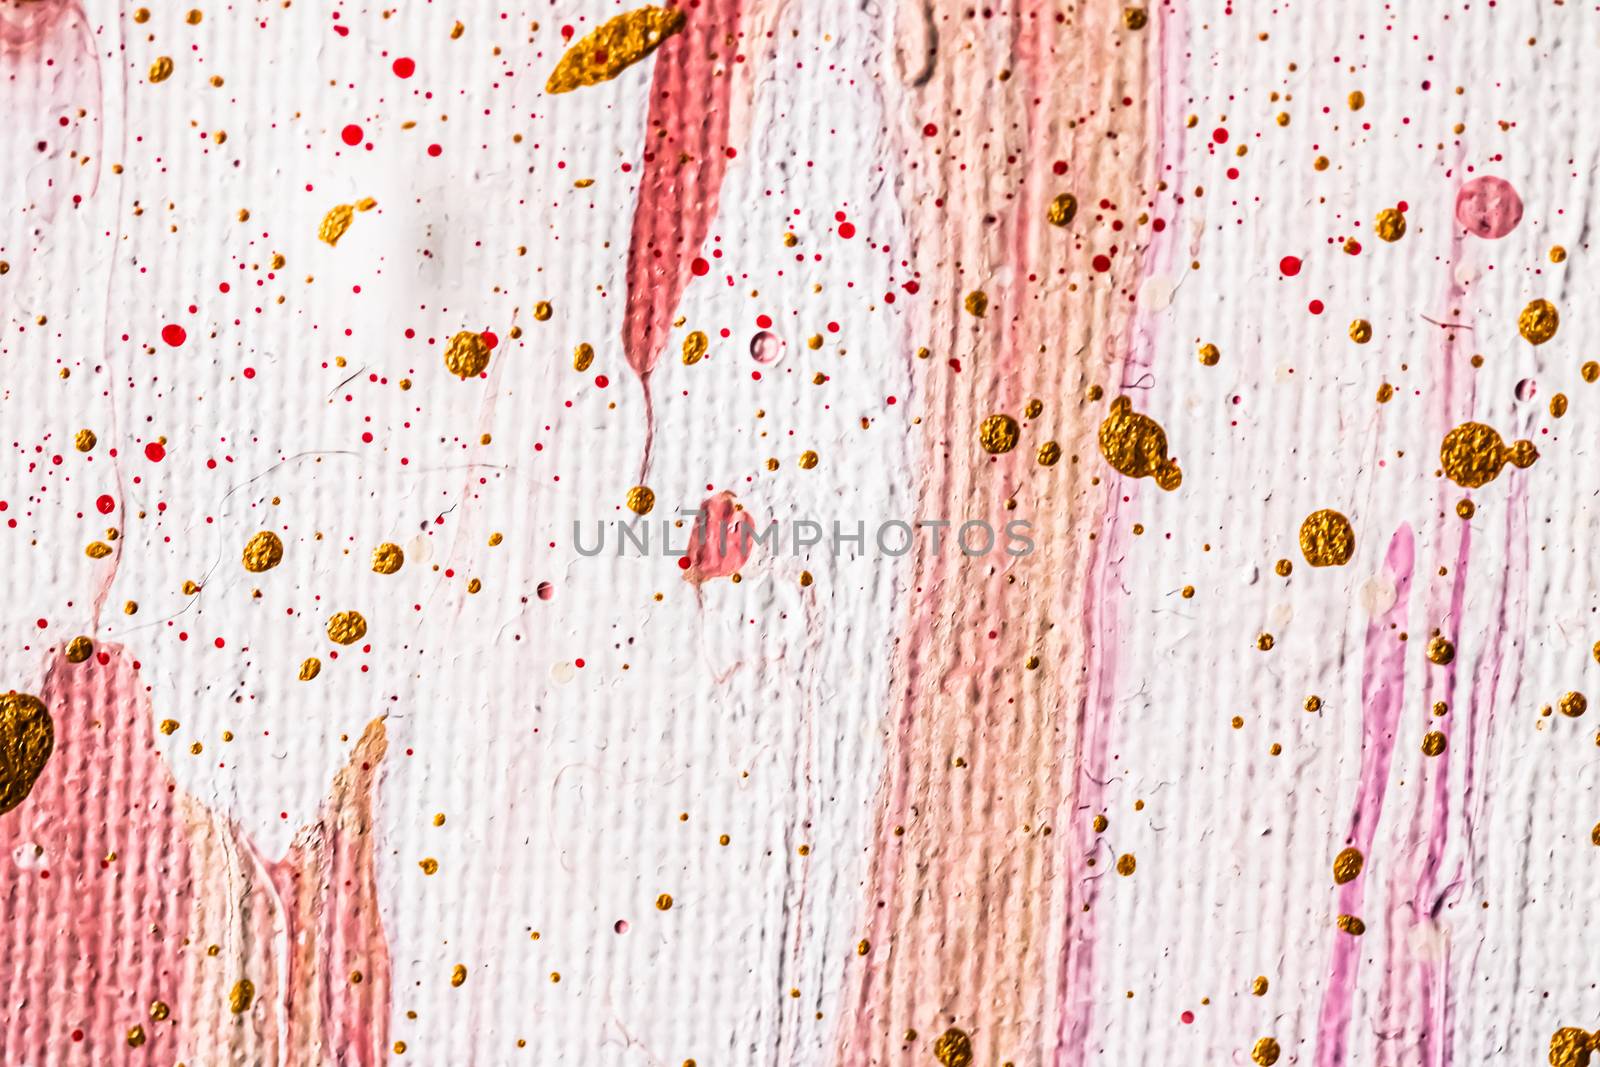 Artistic brush strokes and paint splashes as abstract art and minimalistic background, contemporary design and modern branding backdrop